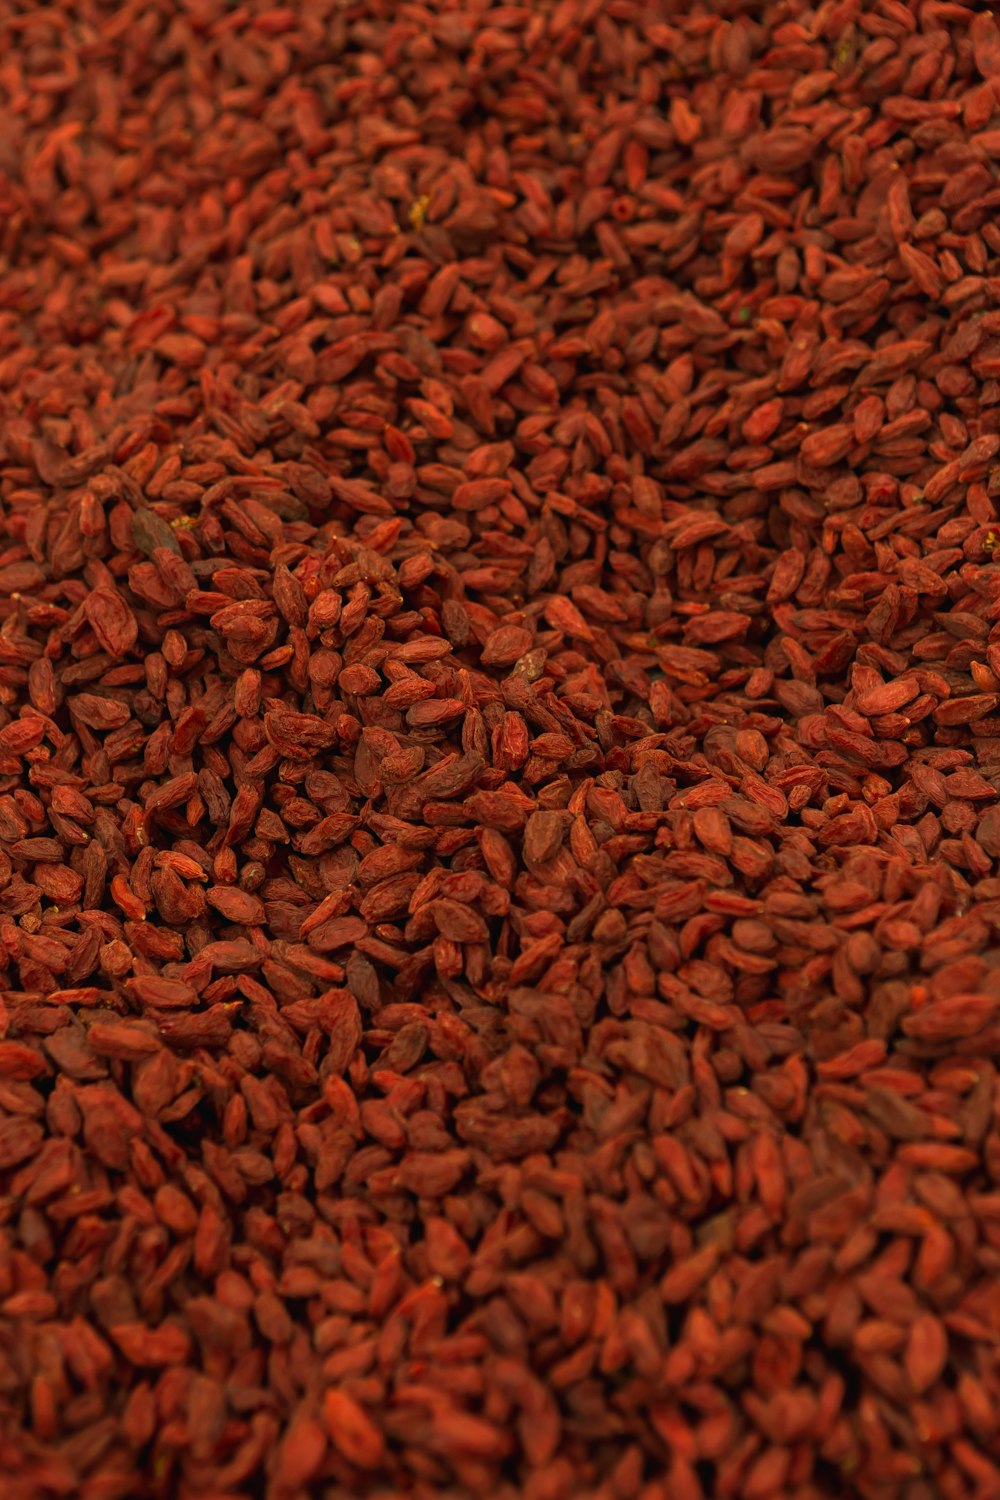 a close up of a pile of red seeds